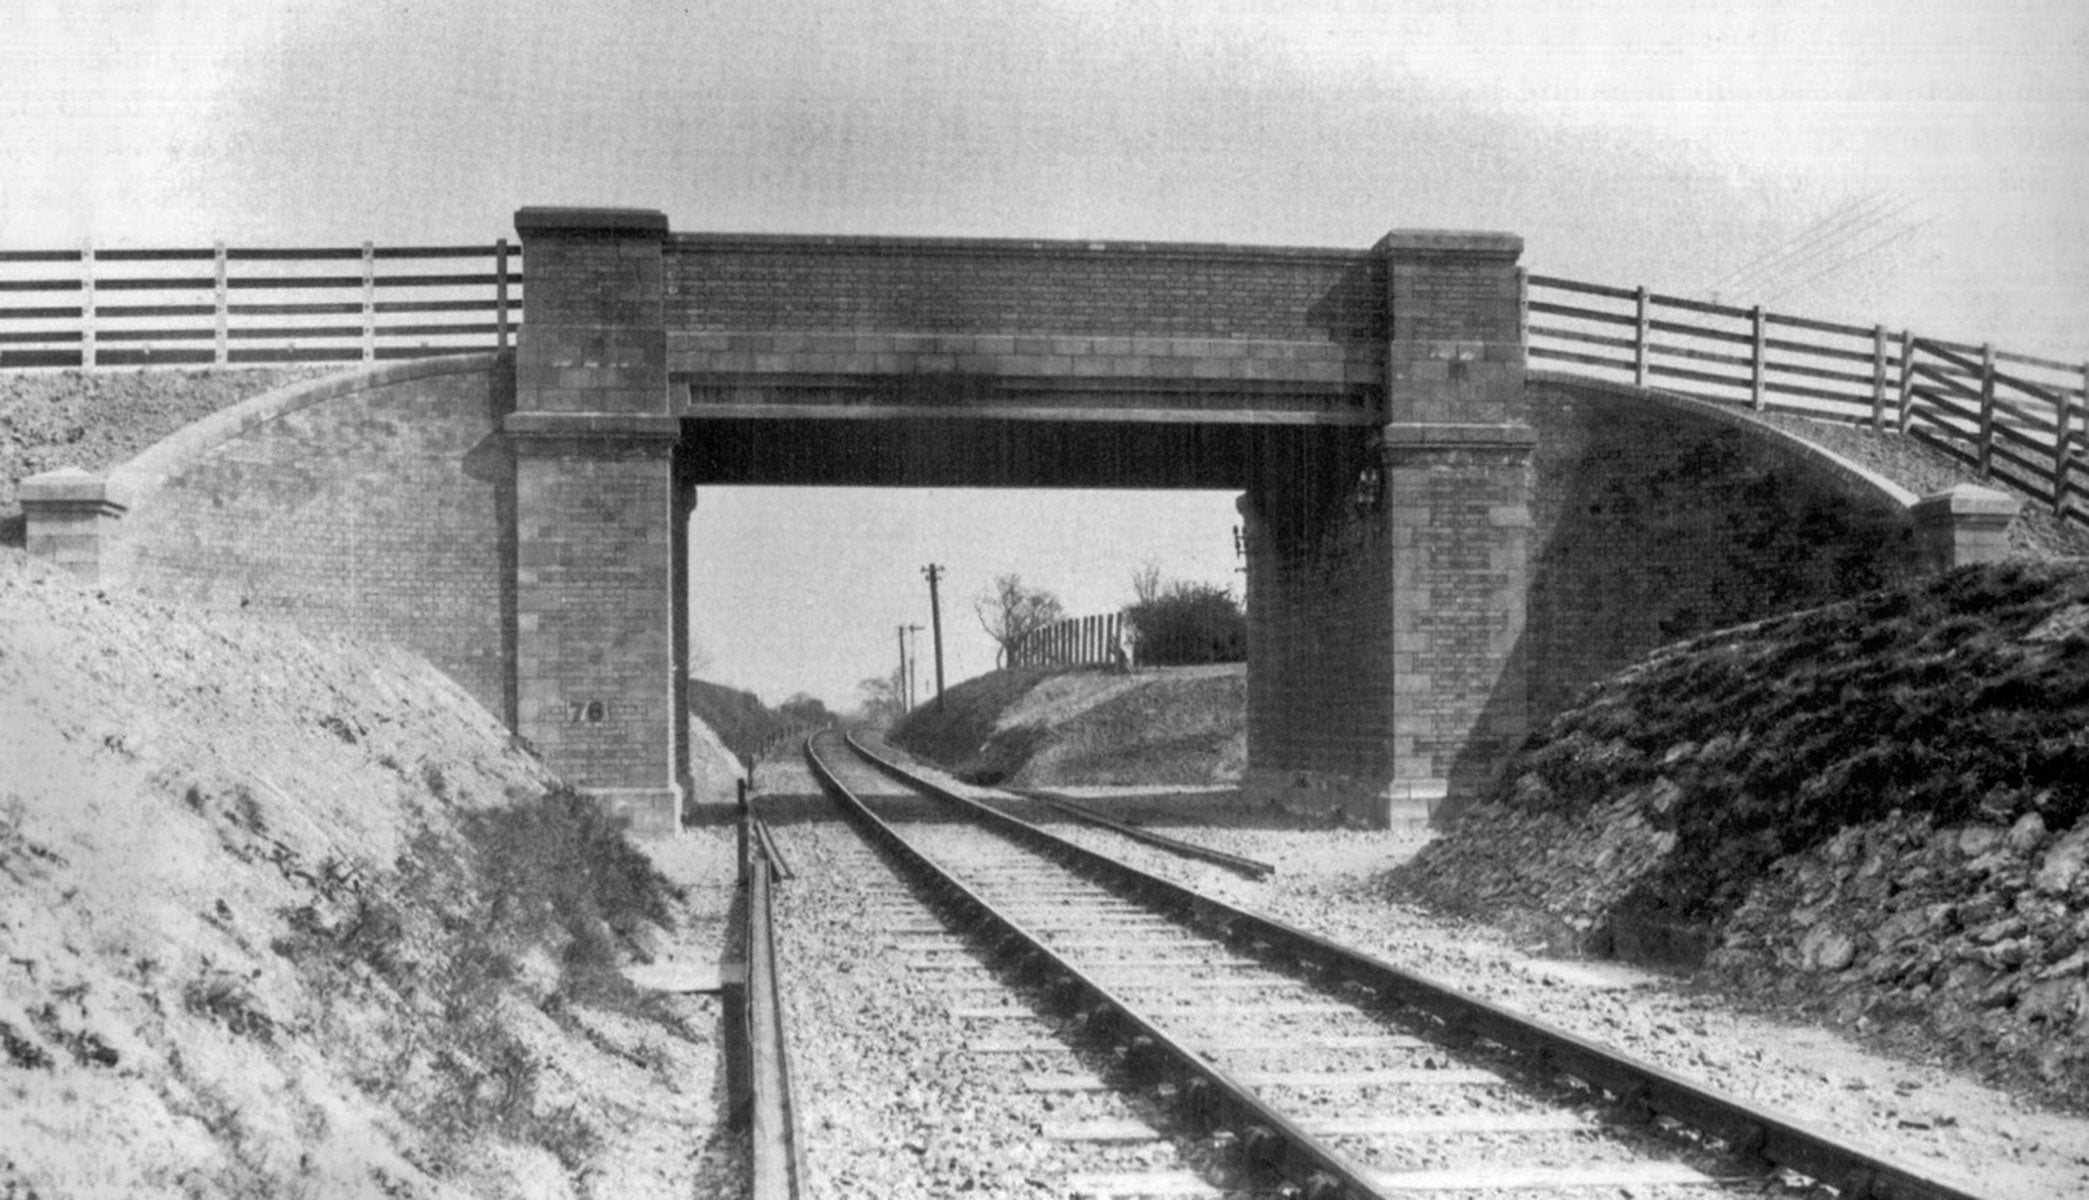 The bridge when the railway was in use